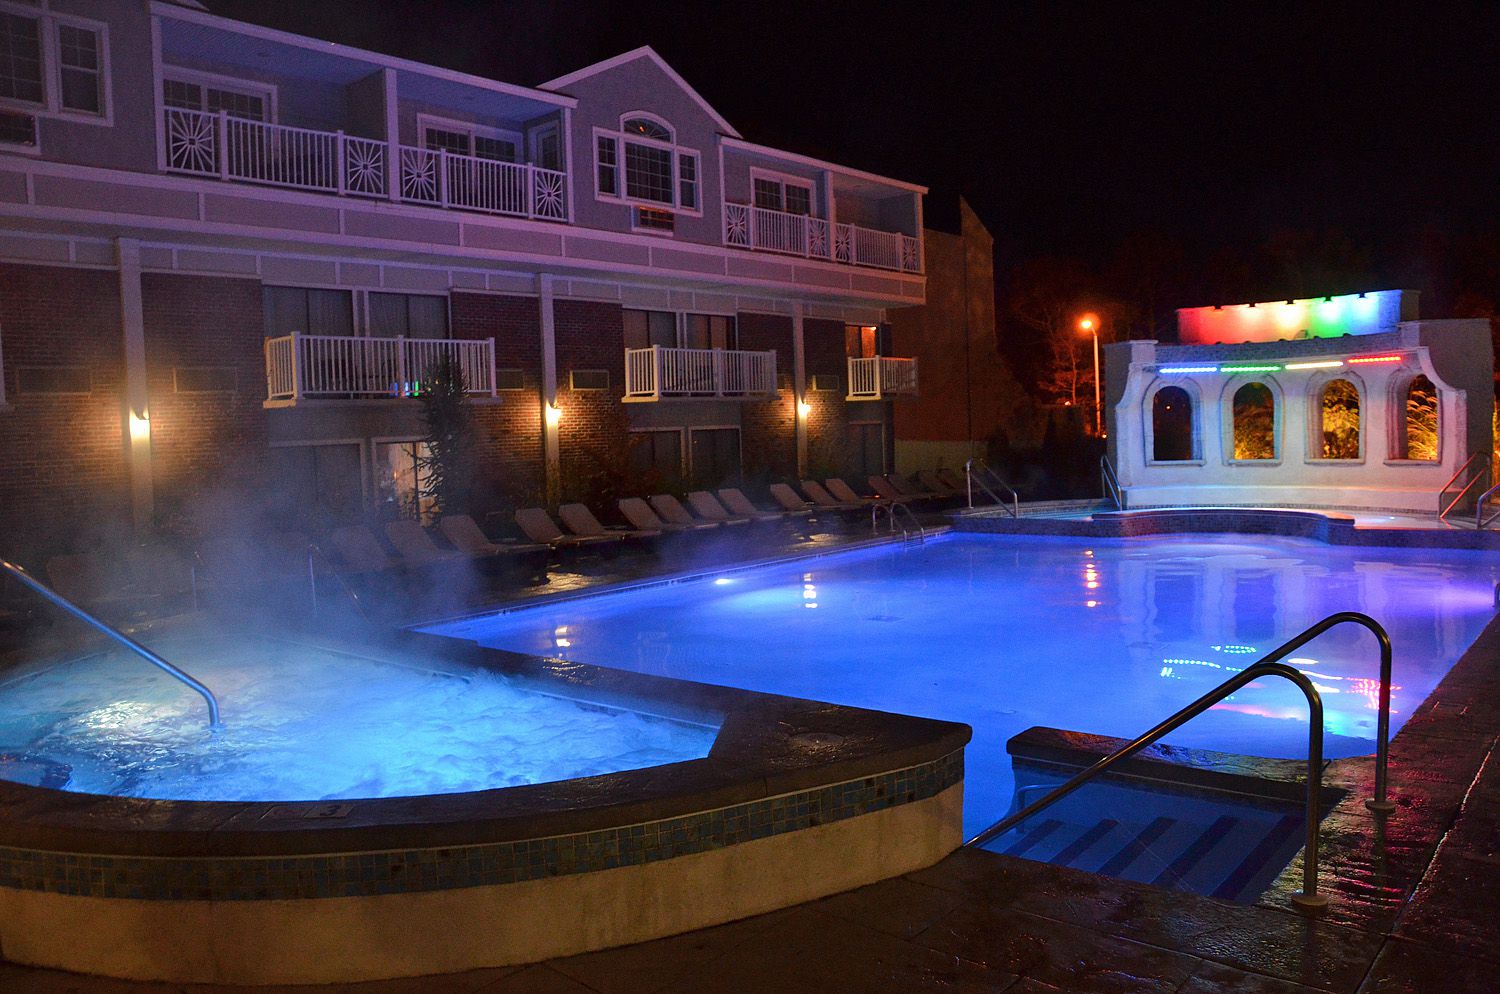 New England Hotels with Jacuzzi and Fireplace In Room Lovely 12 Places to Swim Outdoors Year Round In New England